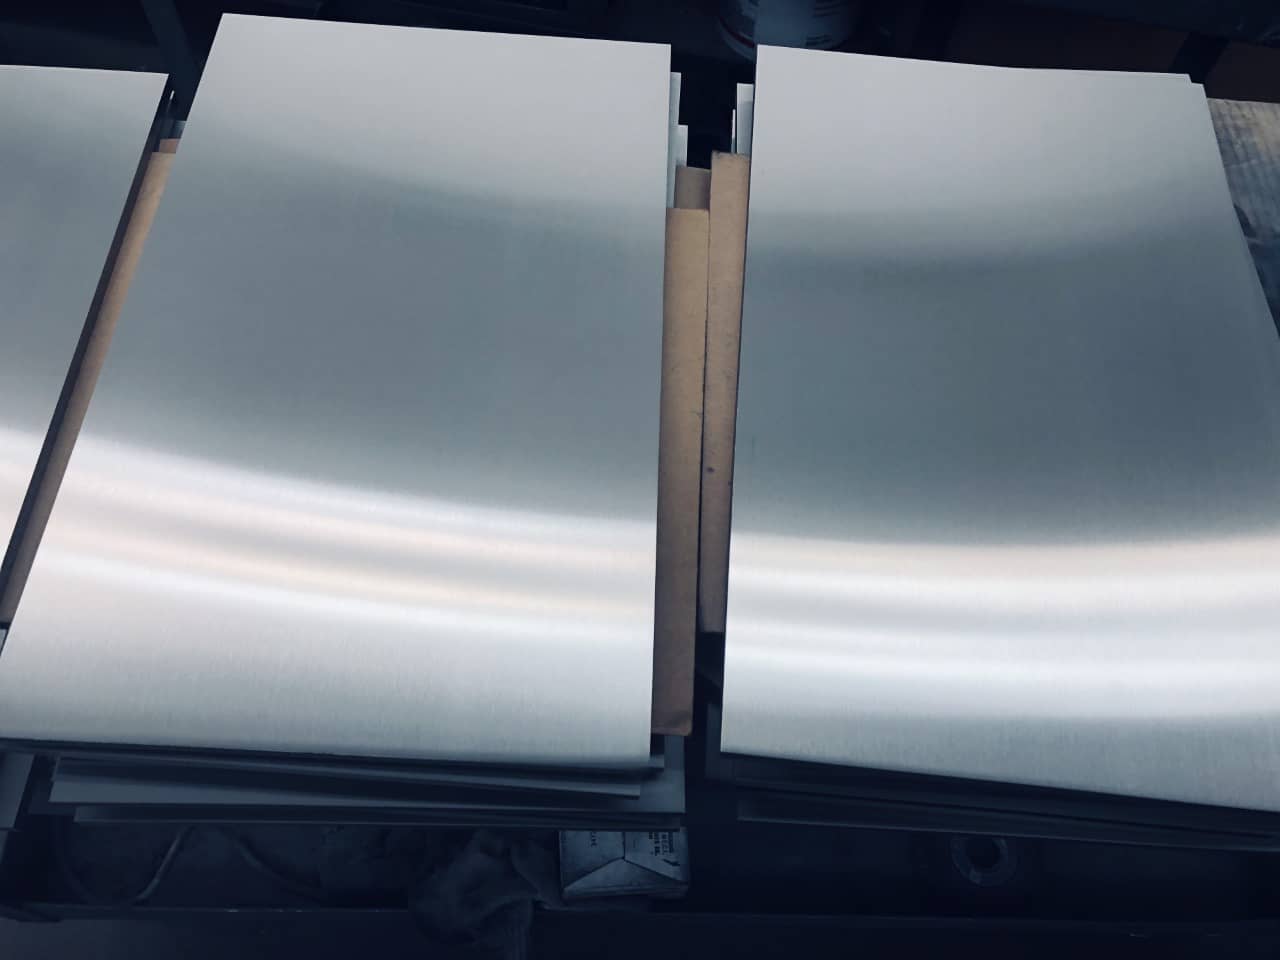 Line Grain stainless steel sheets